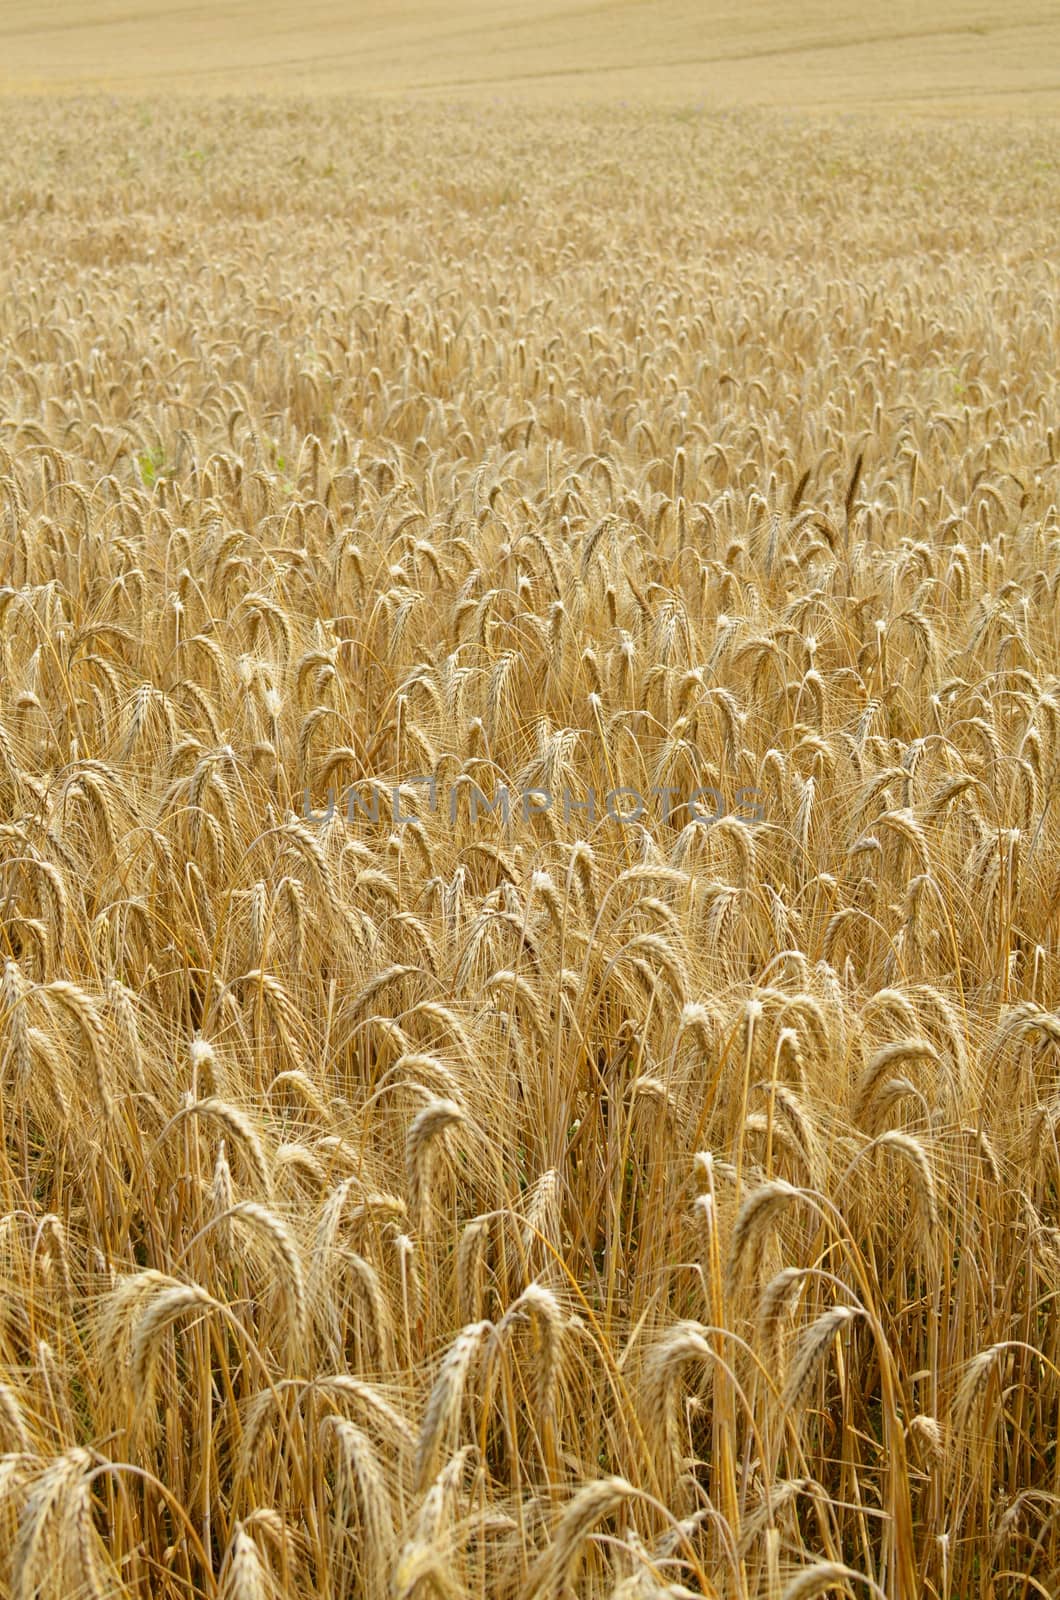 Background Field of grain in gold color